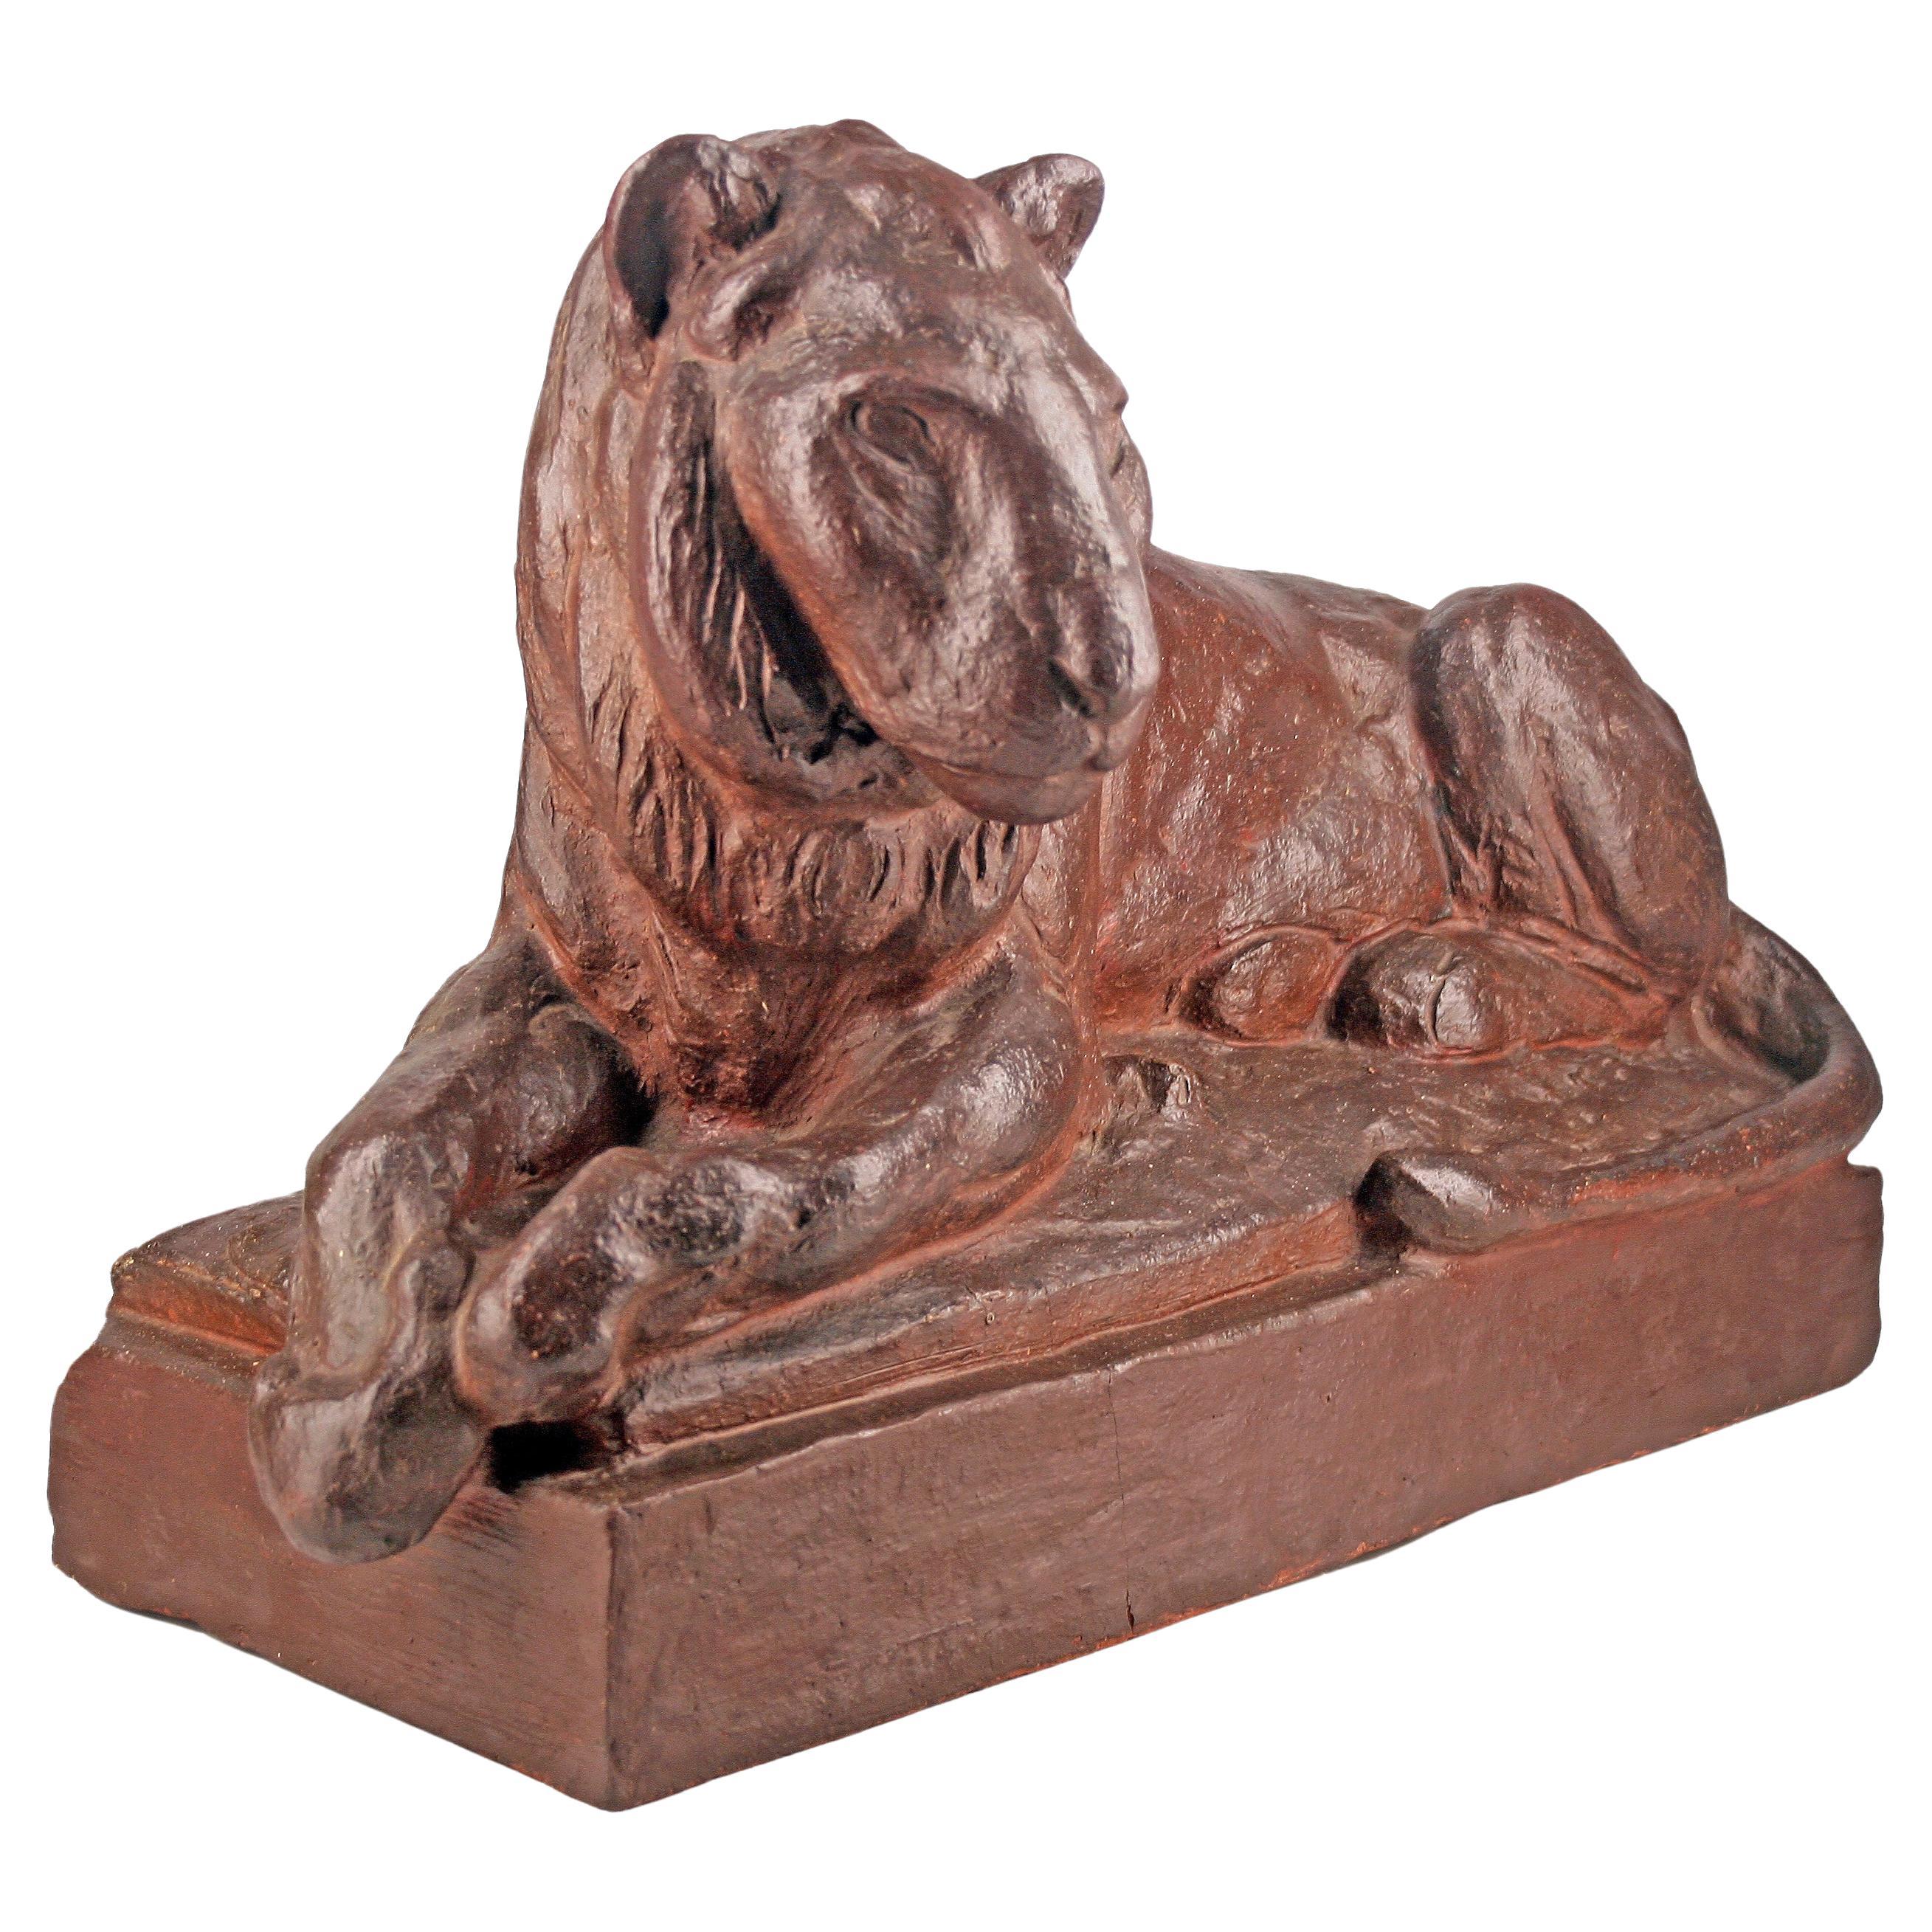 19th C. German Terracotta Sculpture of Resting Lion by Animalier Author A. Gaul For Sale